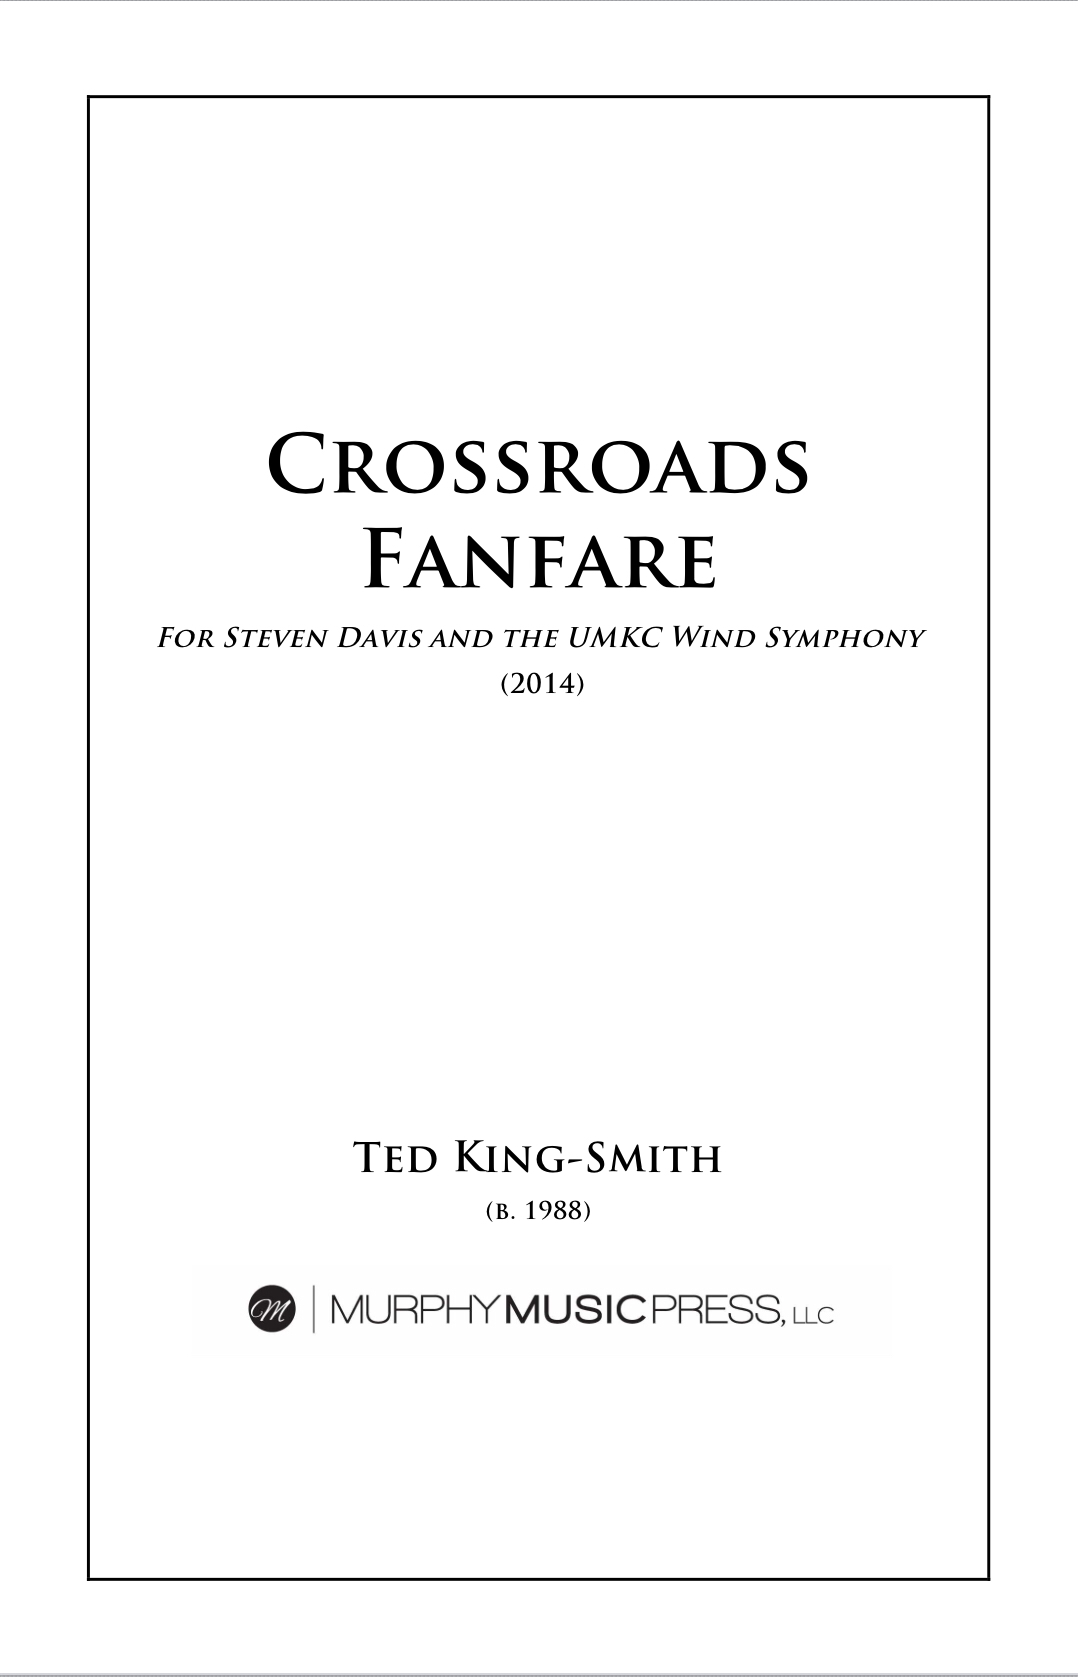 Crossroads Fanare by Ted King-Smith